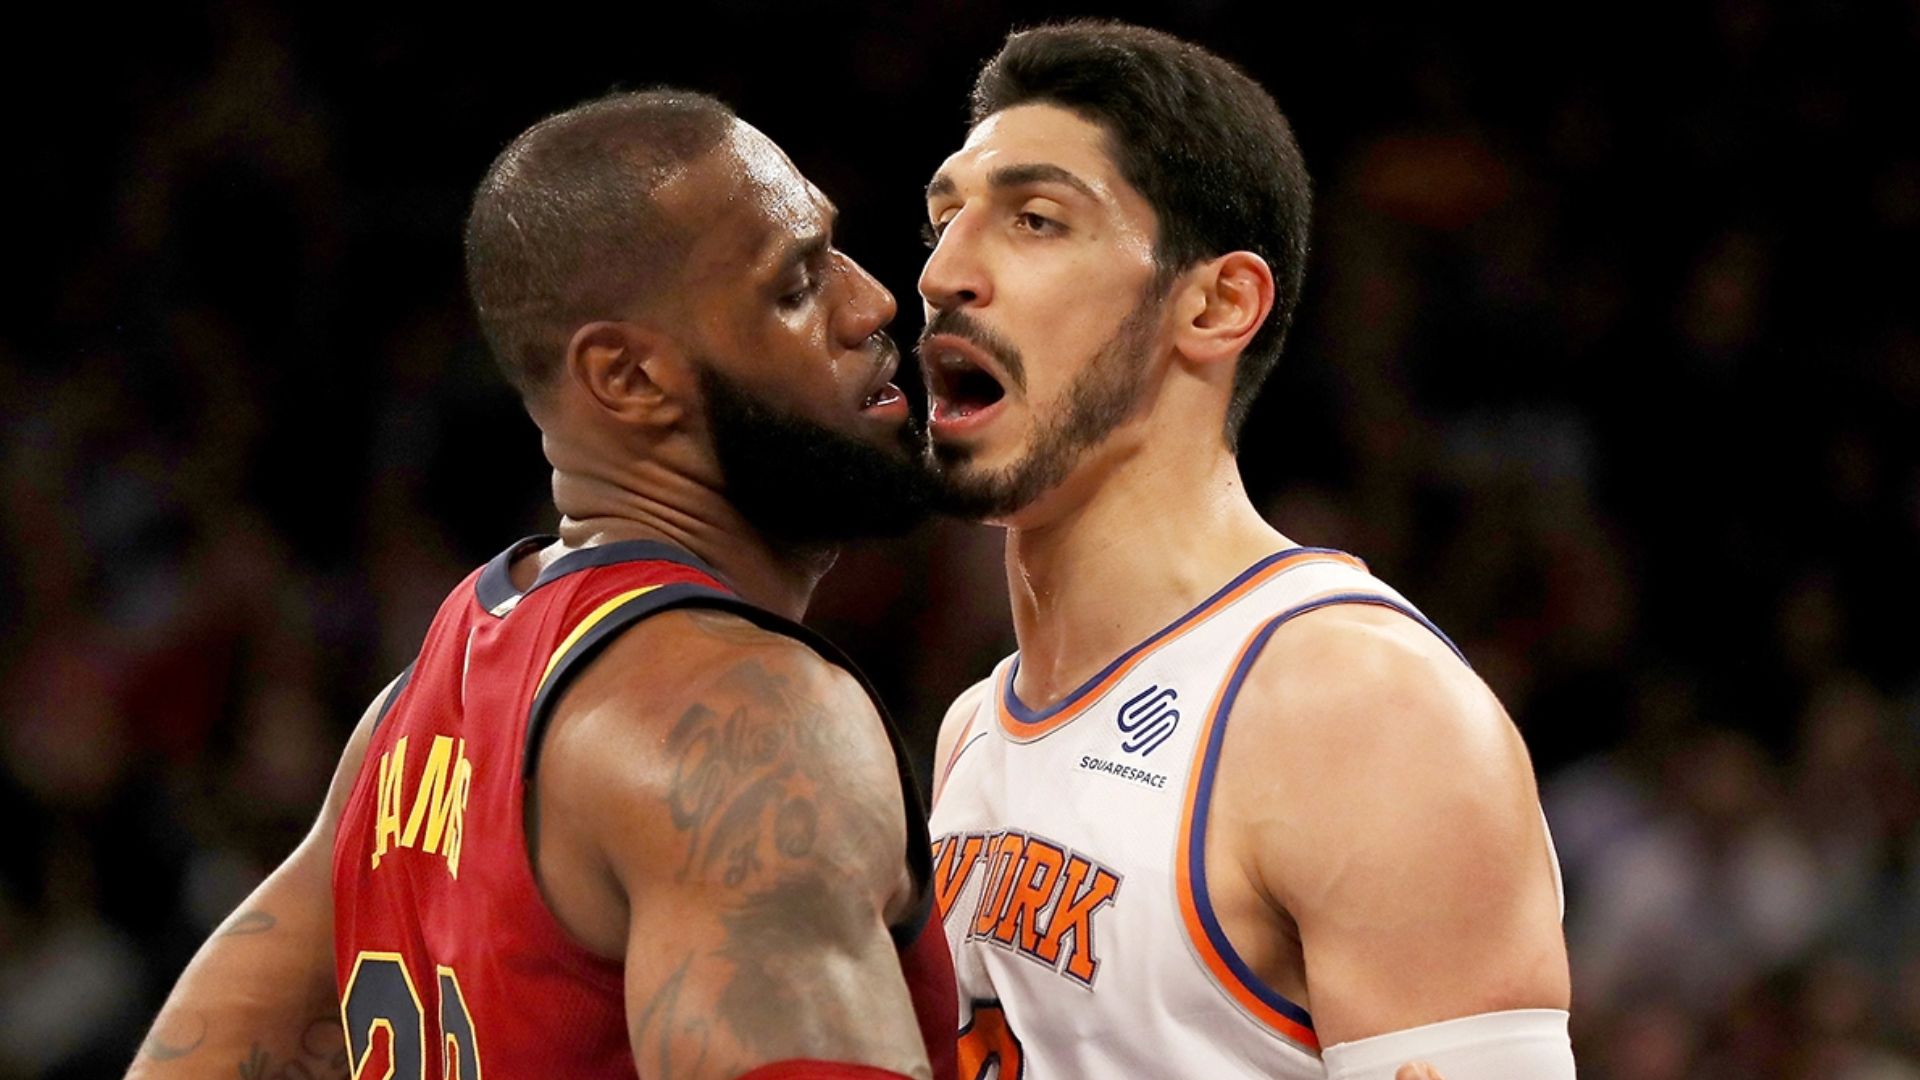 Enes Kanter In A Fight With Lebron